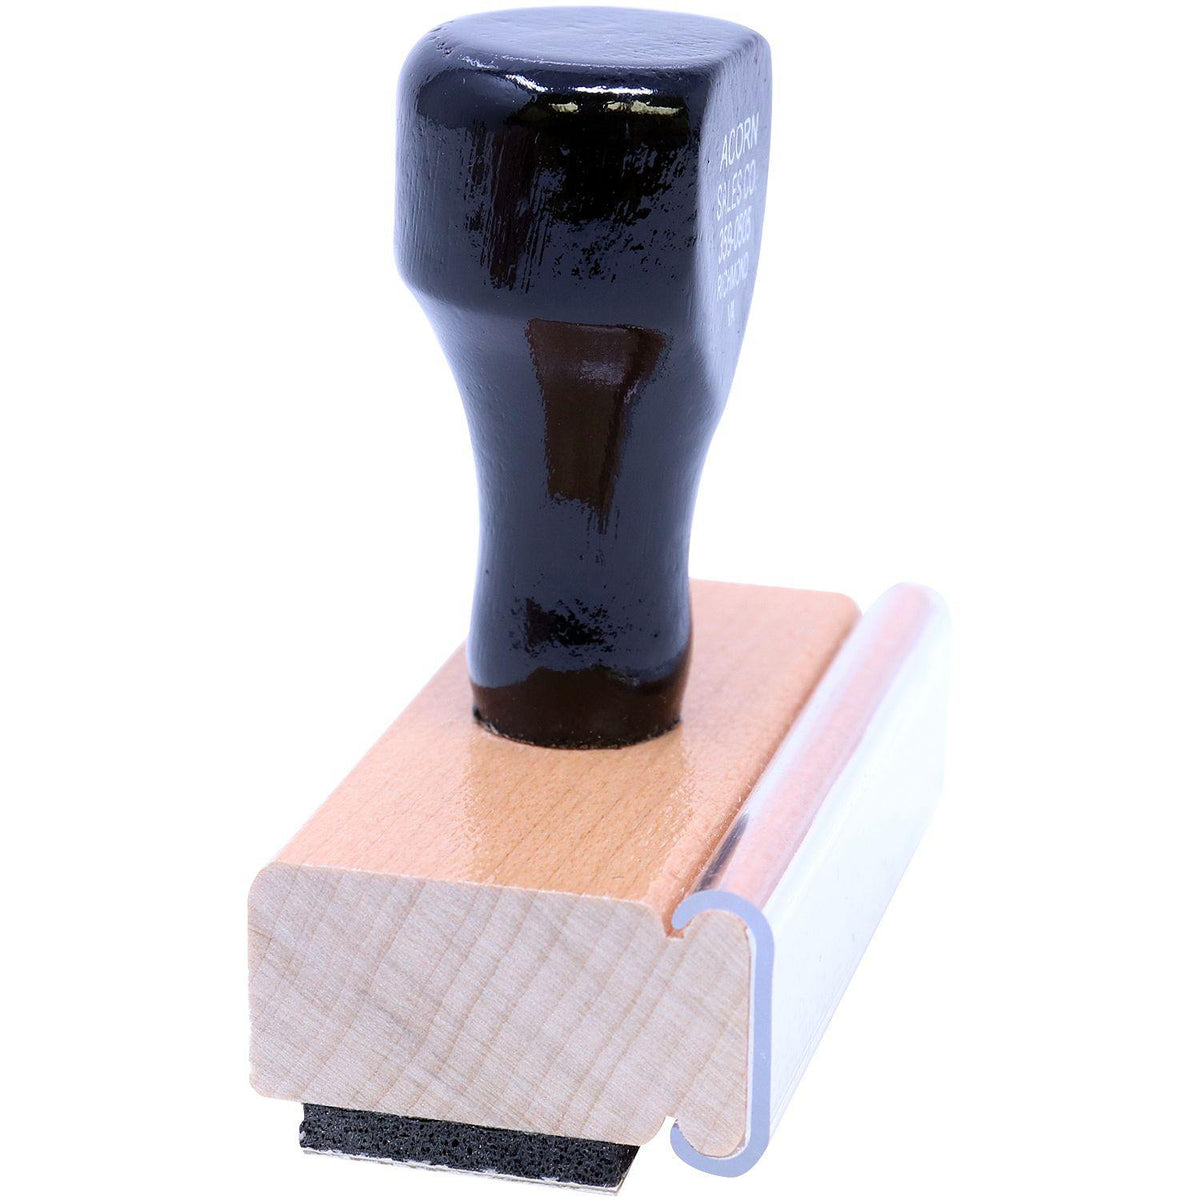 Side View of Large Im Proud Of You Rubber Stamp at an Angle